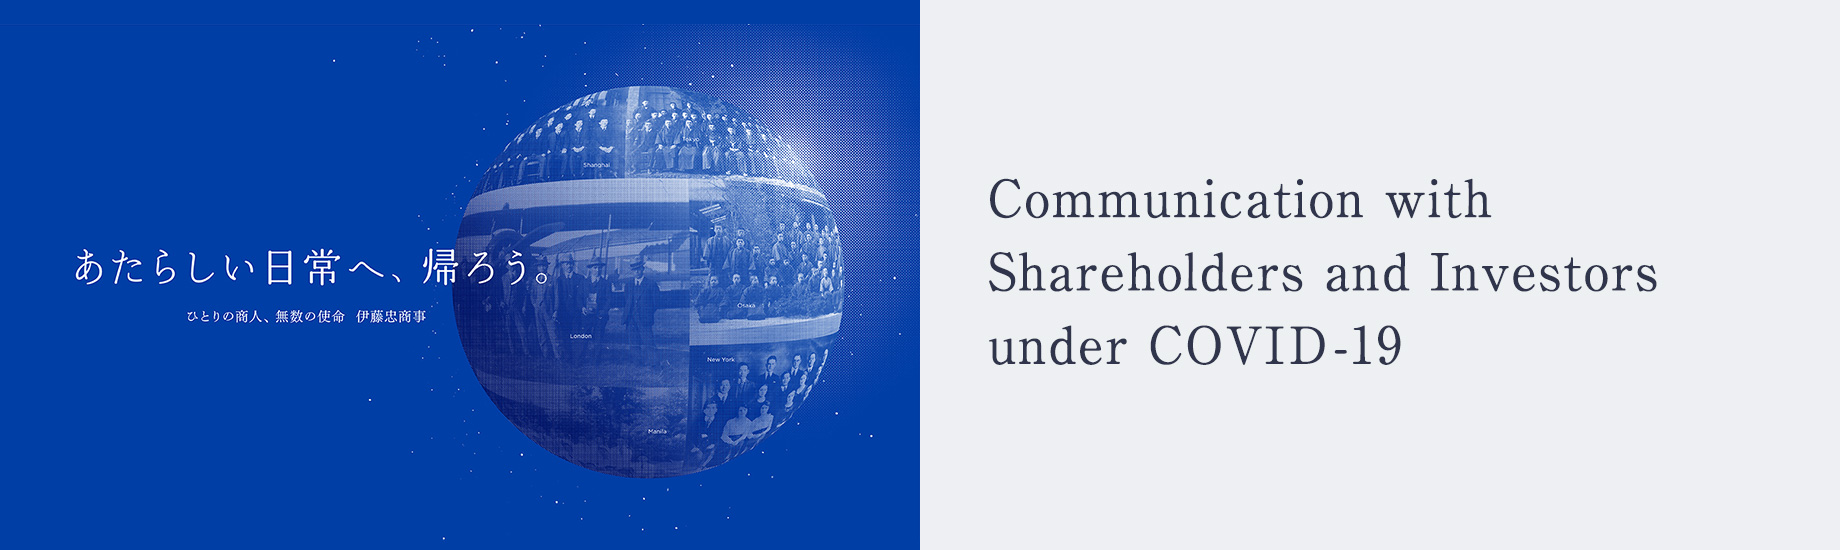 Communication with Shareholders and Investors under COVID-1